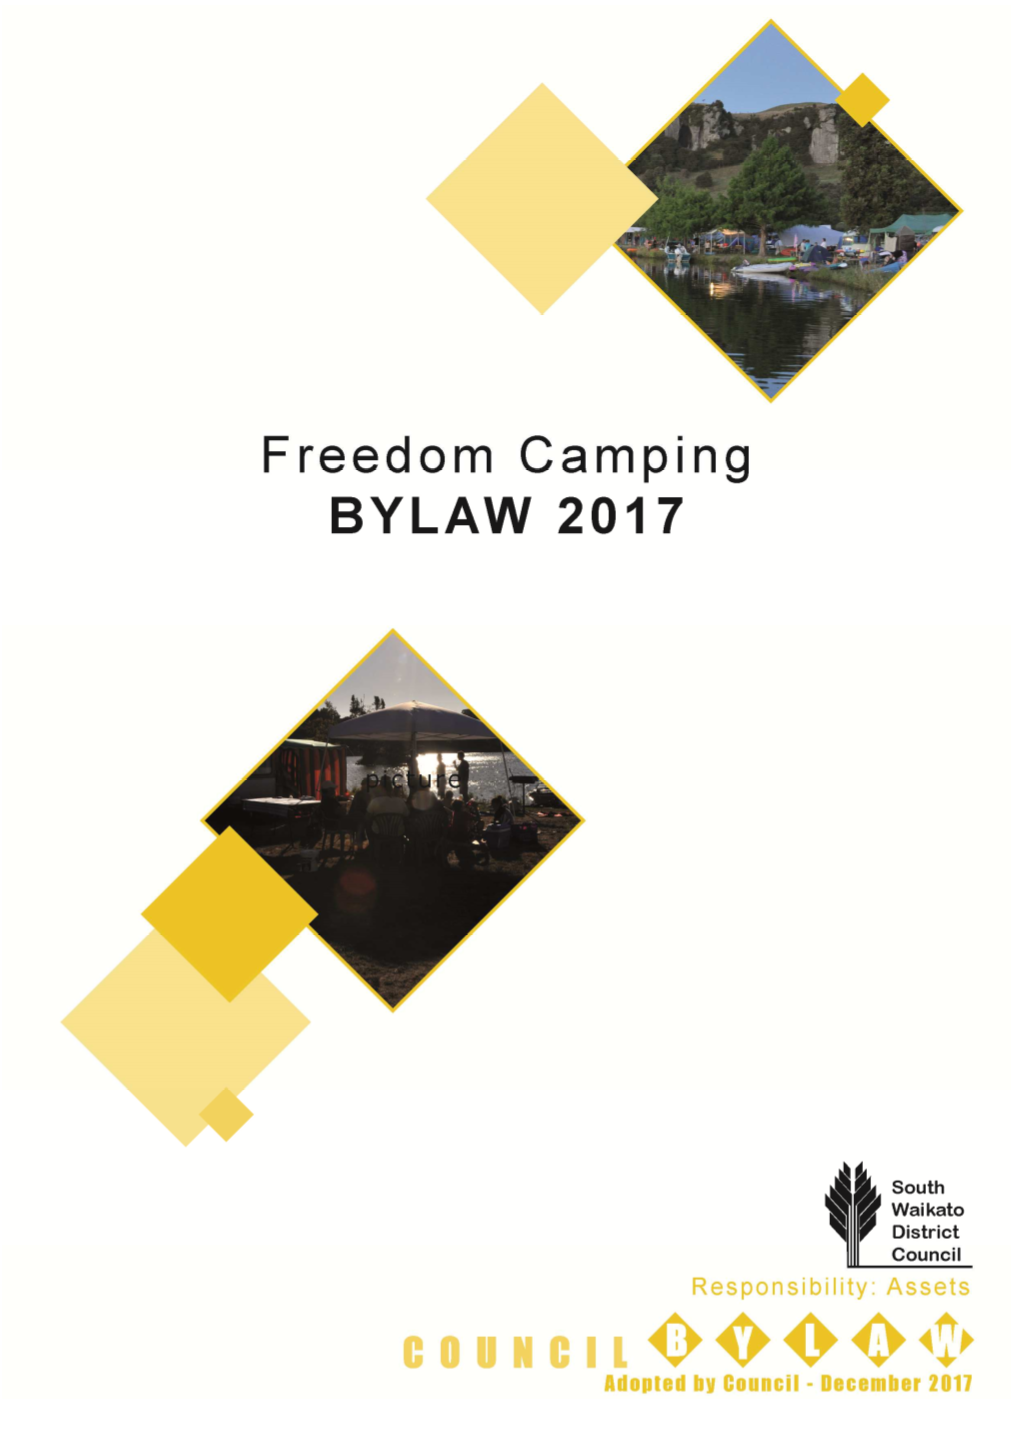 Freedom Camping Bylaw 2017 ECM Docsetid: 419079 Page 2 of 24 Version 1